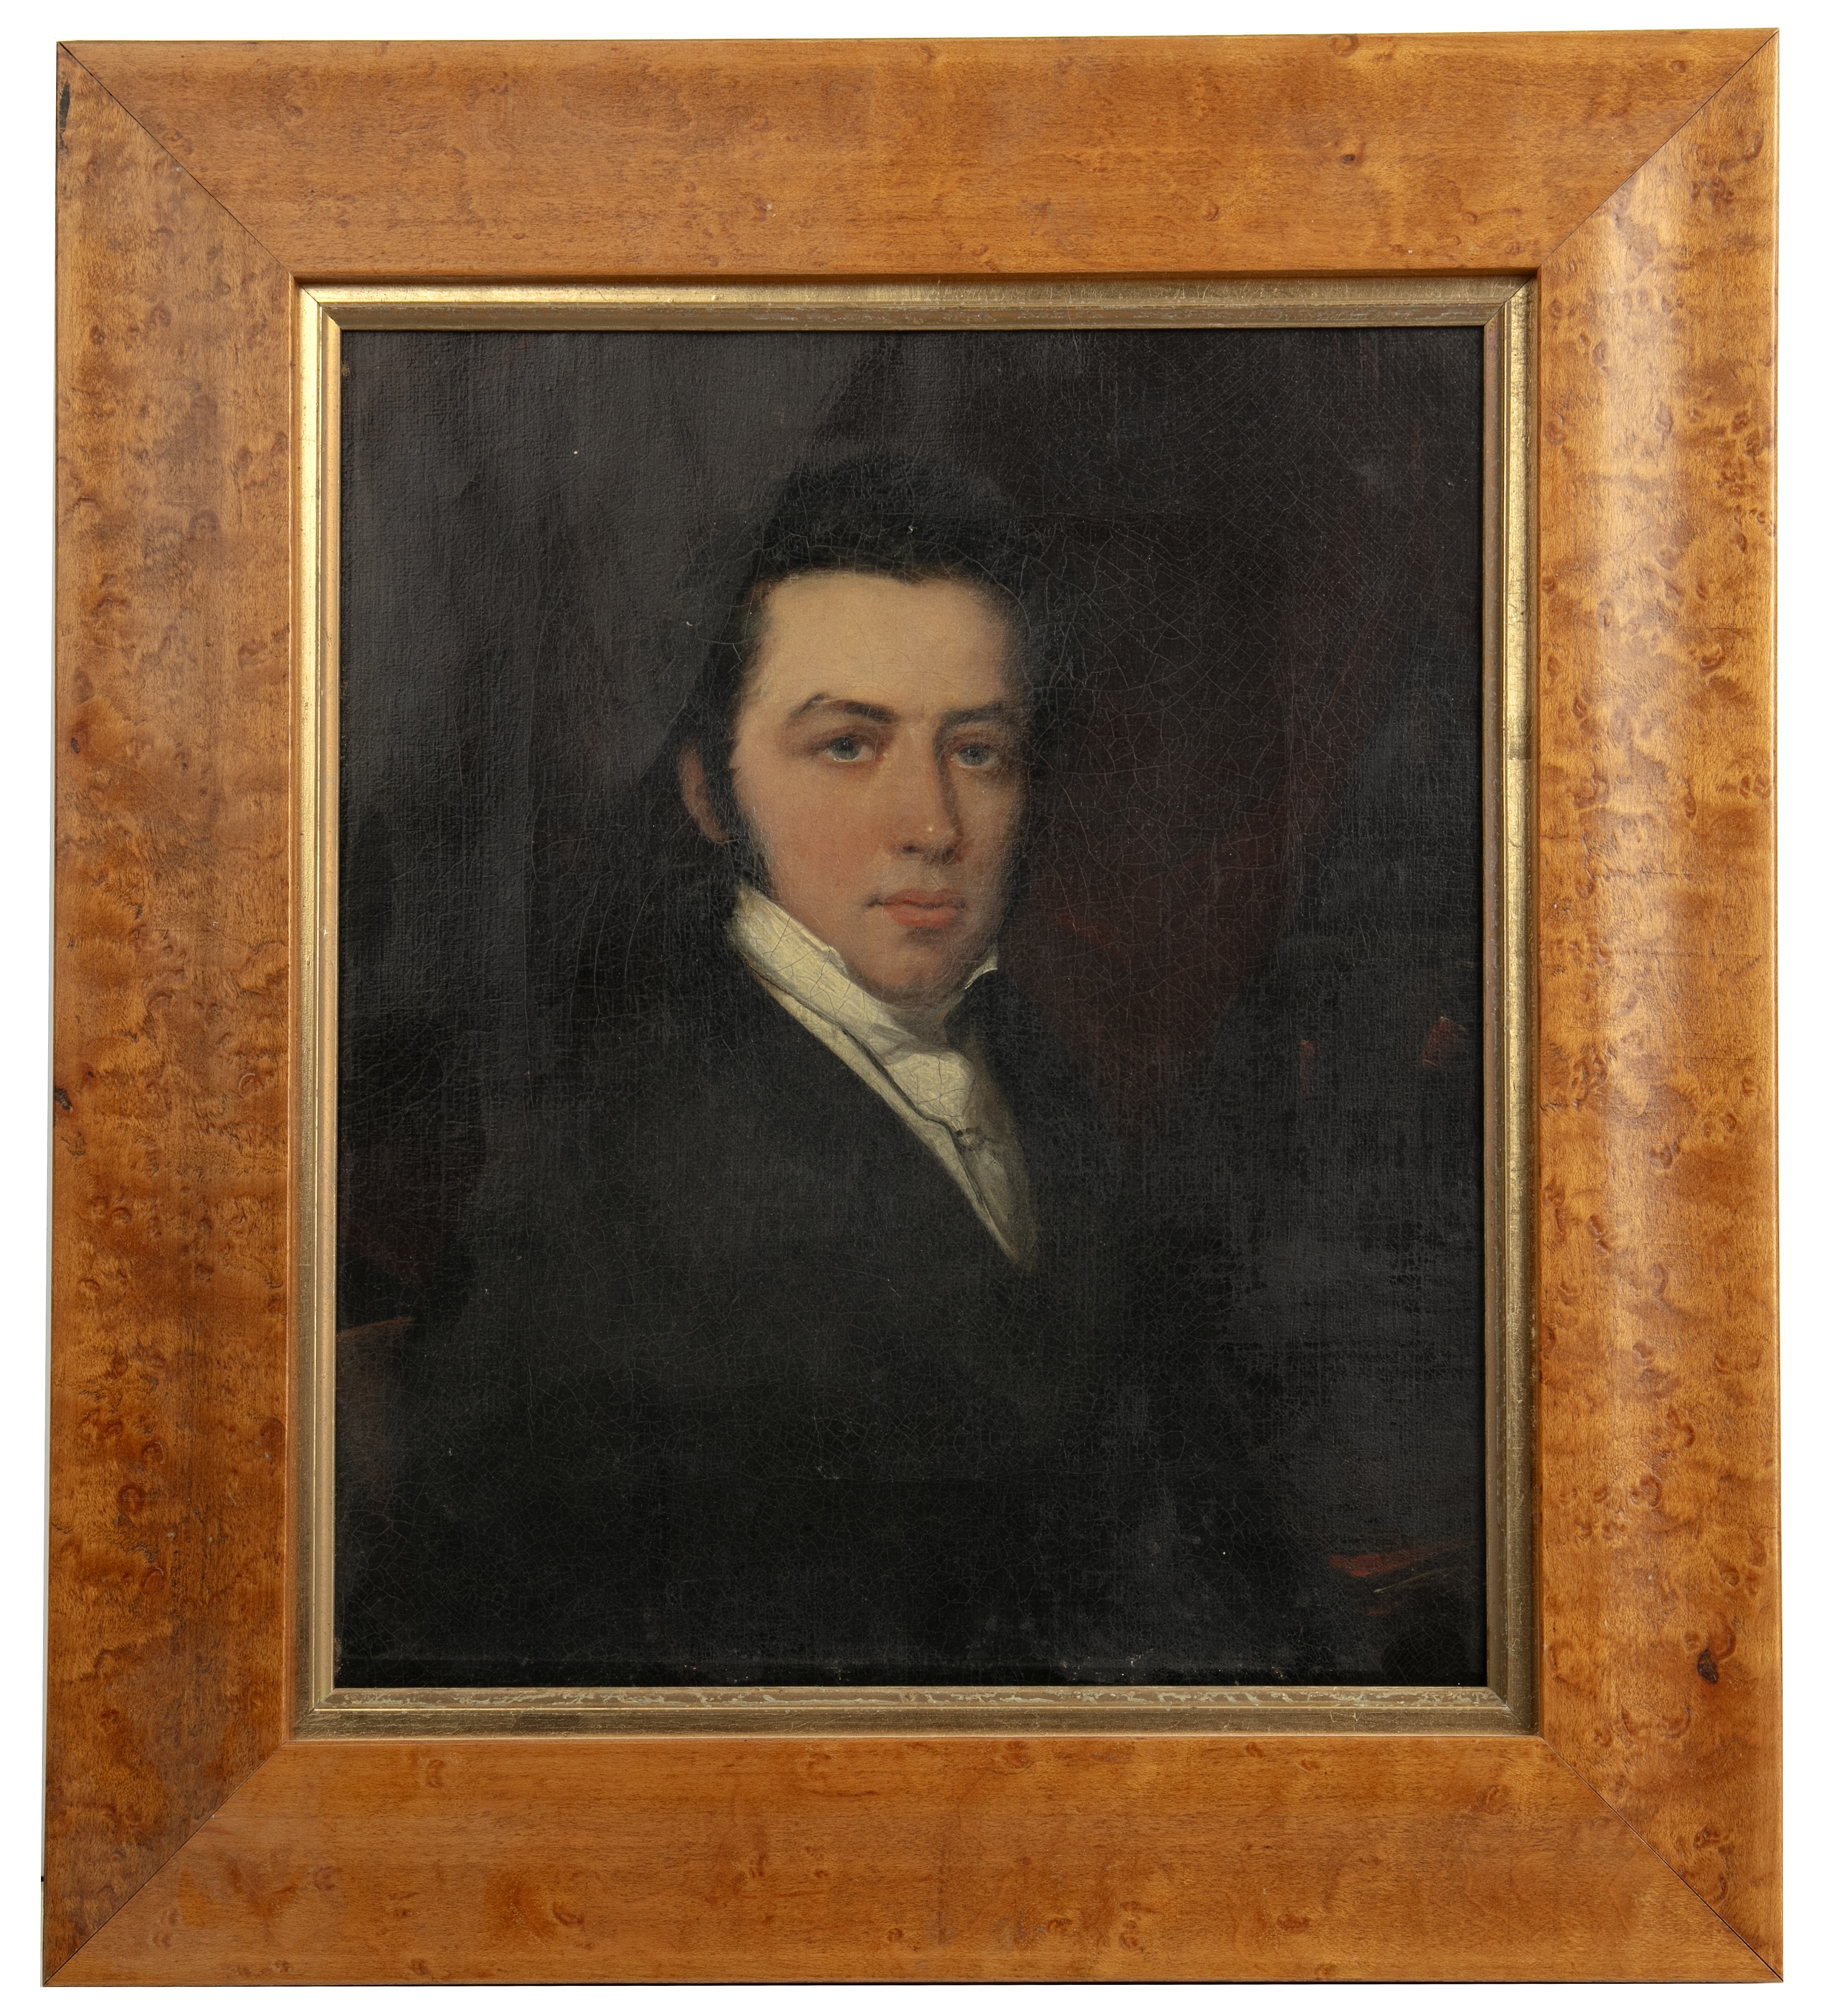 A 19th century head and shoulder portrait of a gentleman, oil on canvas 24cm x 20cm, mounted in a - Image 2 of 3